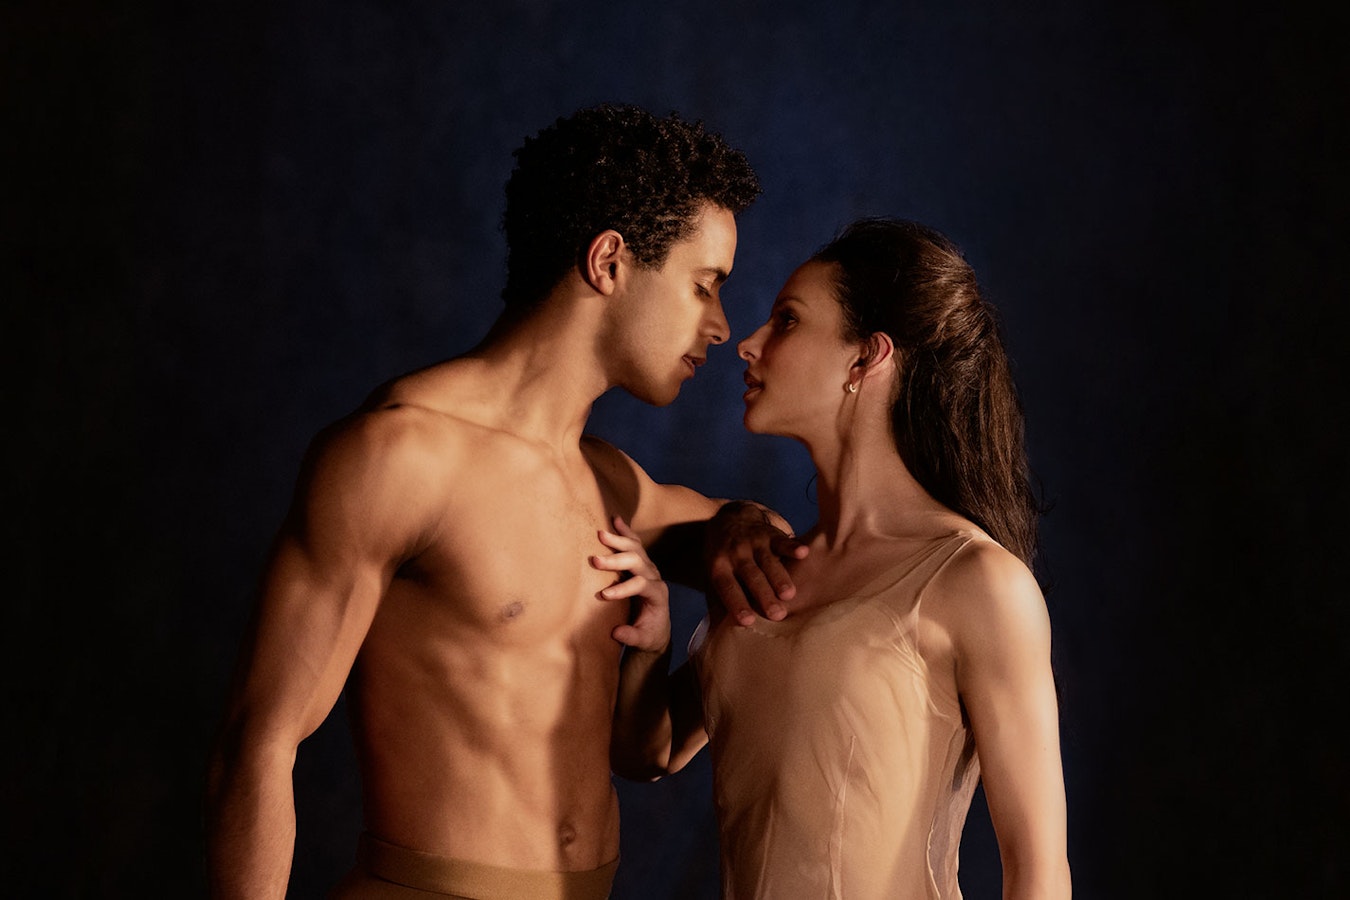 American Ballet Theatre's Like Water For Chocolate